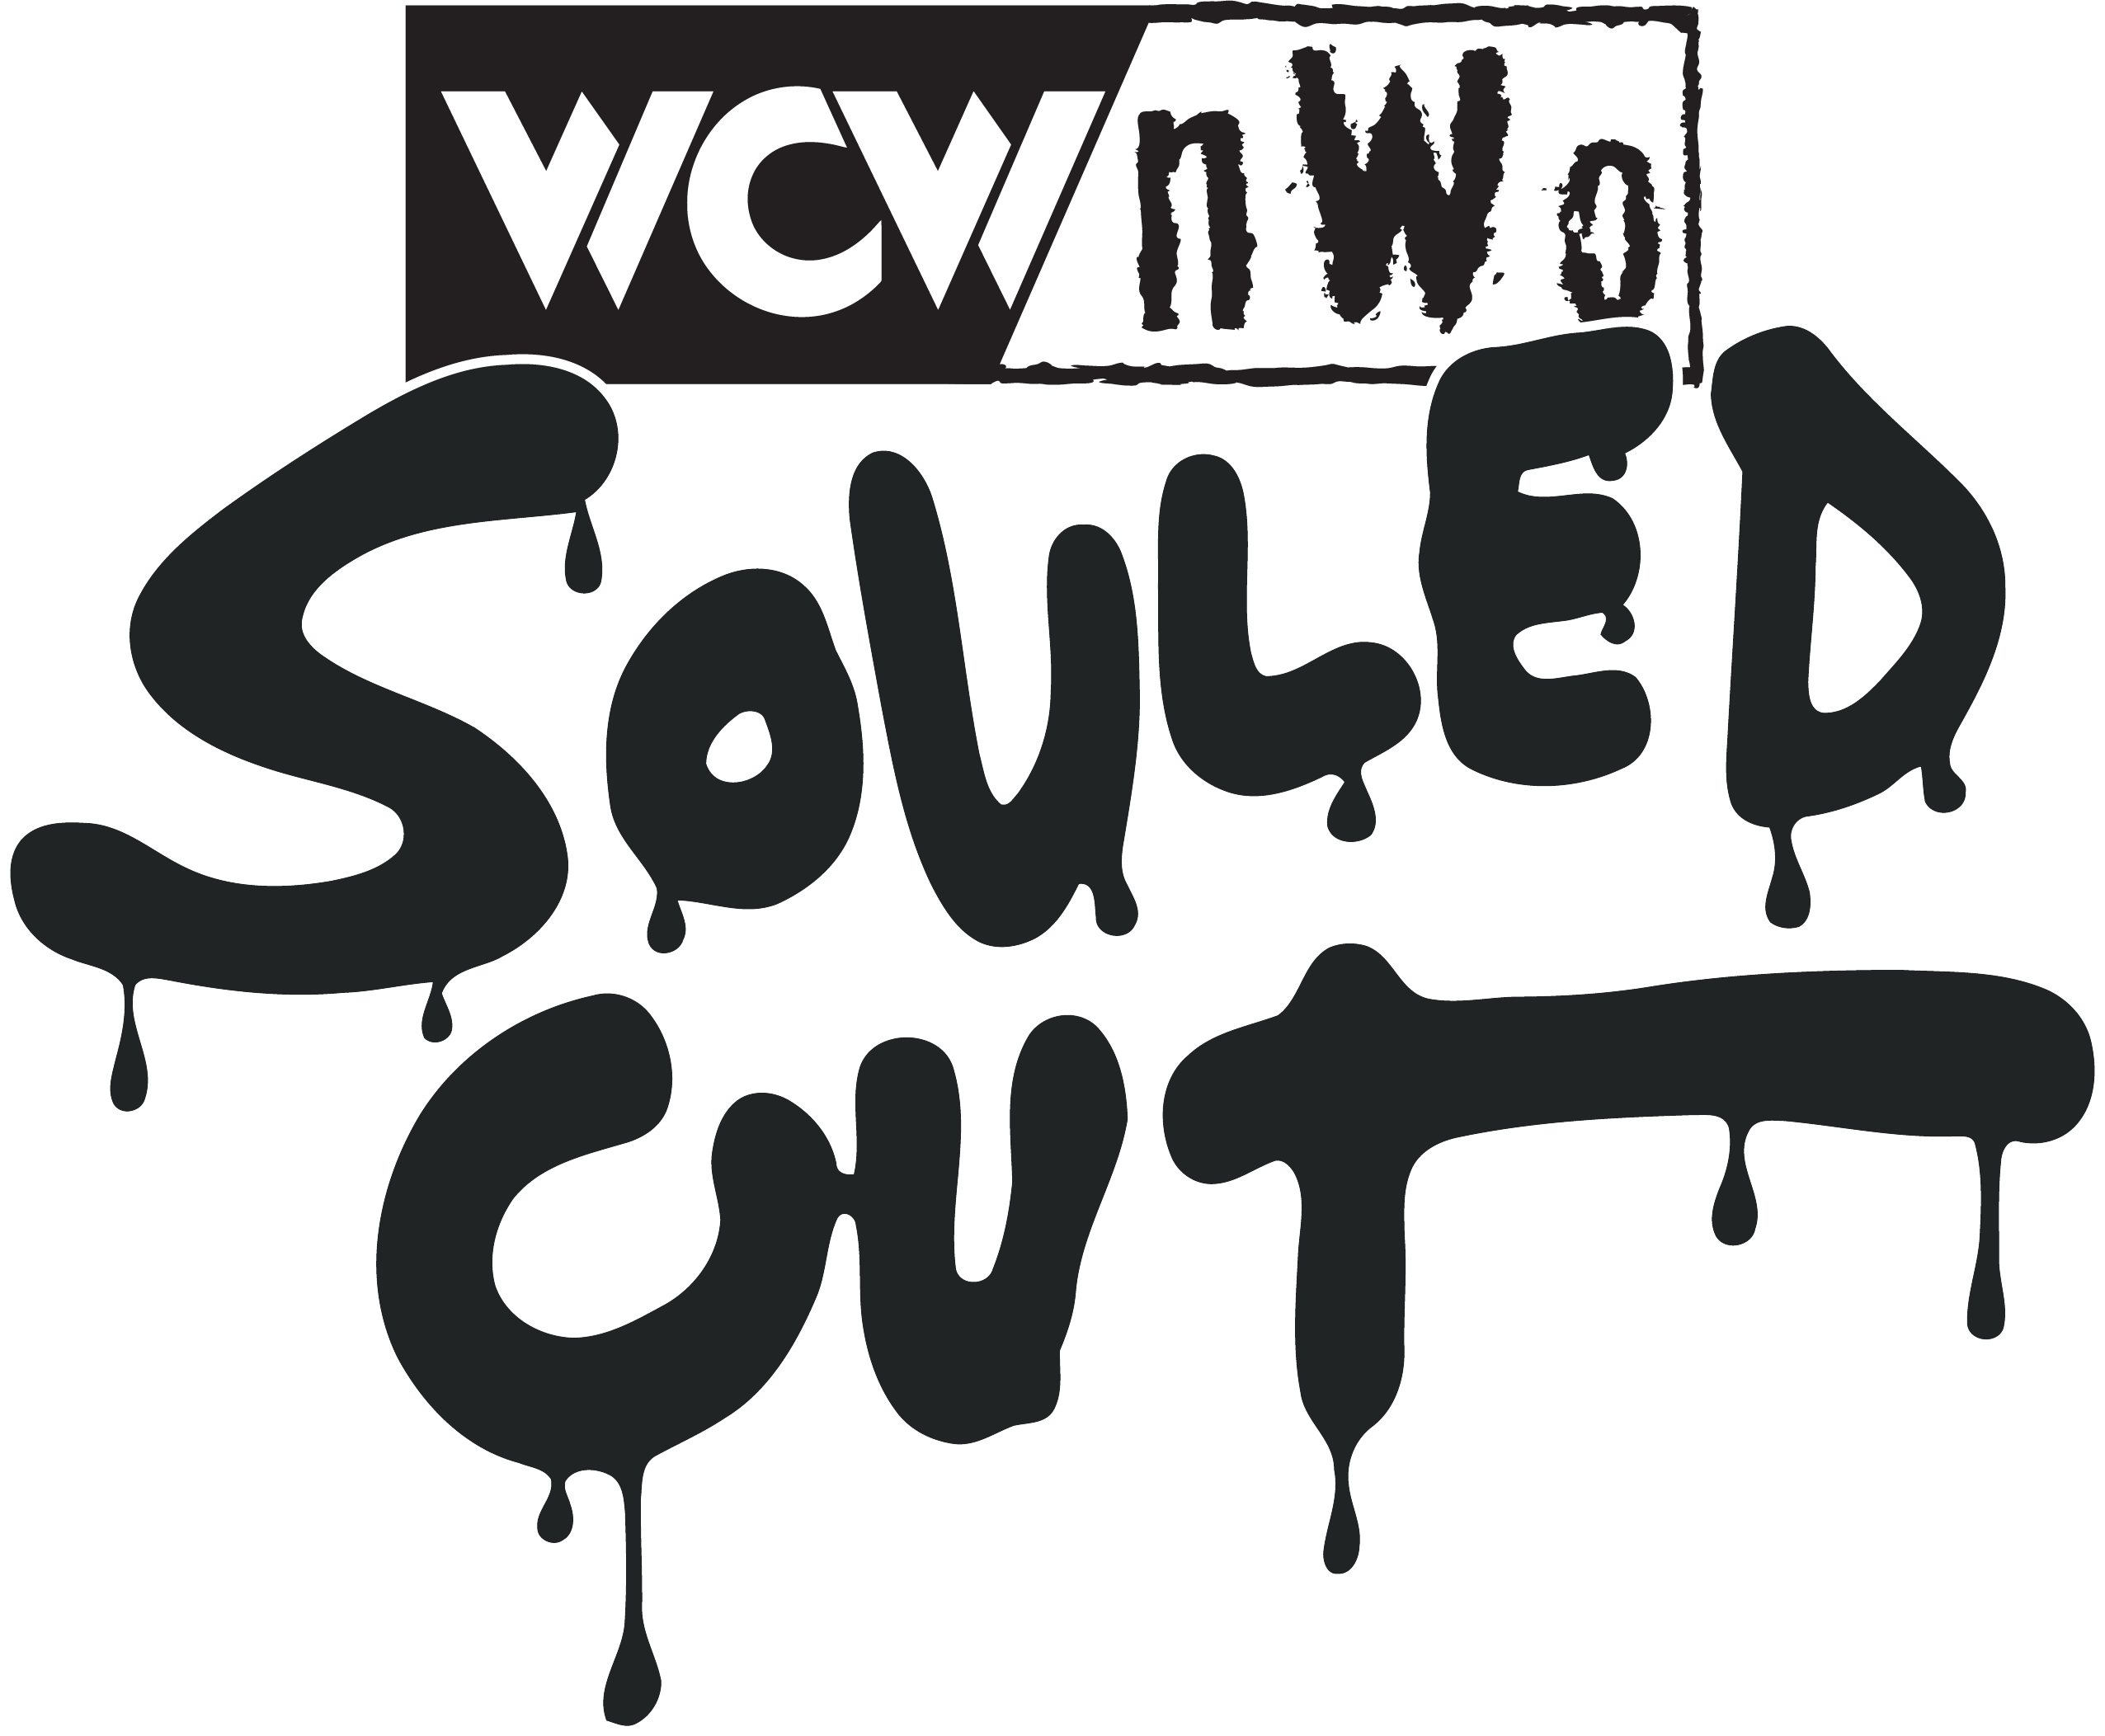 wcw souled out 1997 vhs